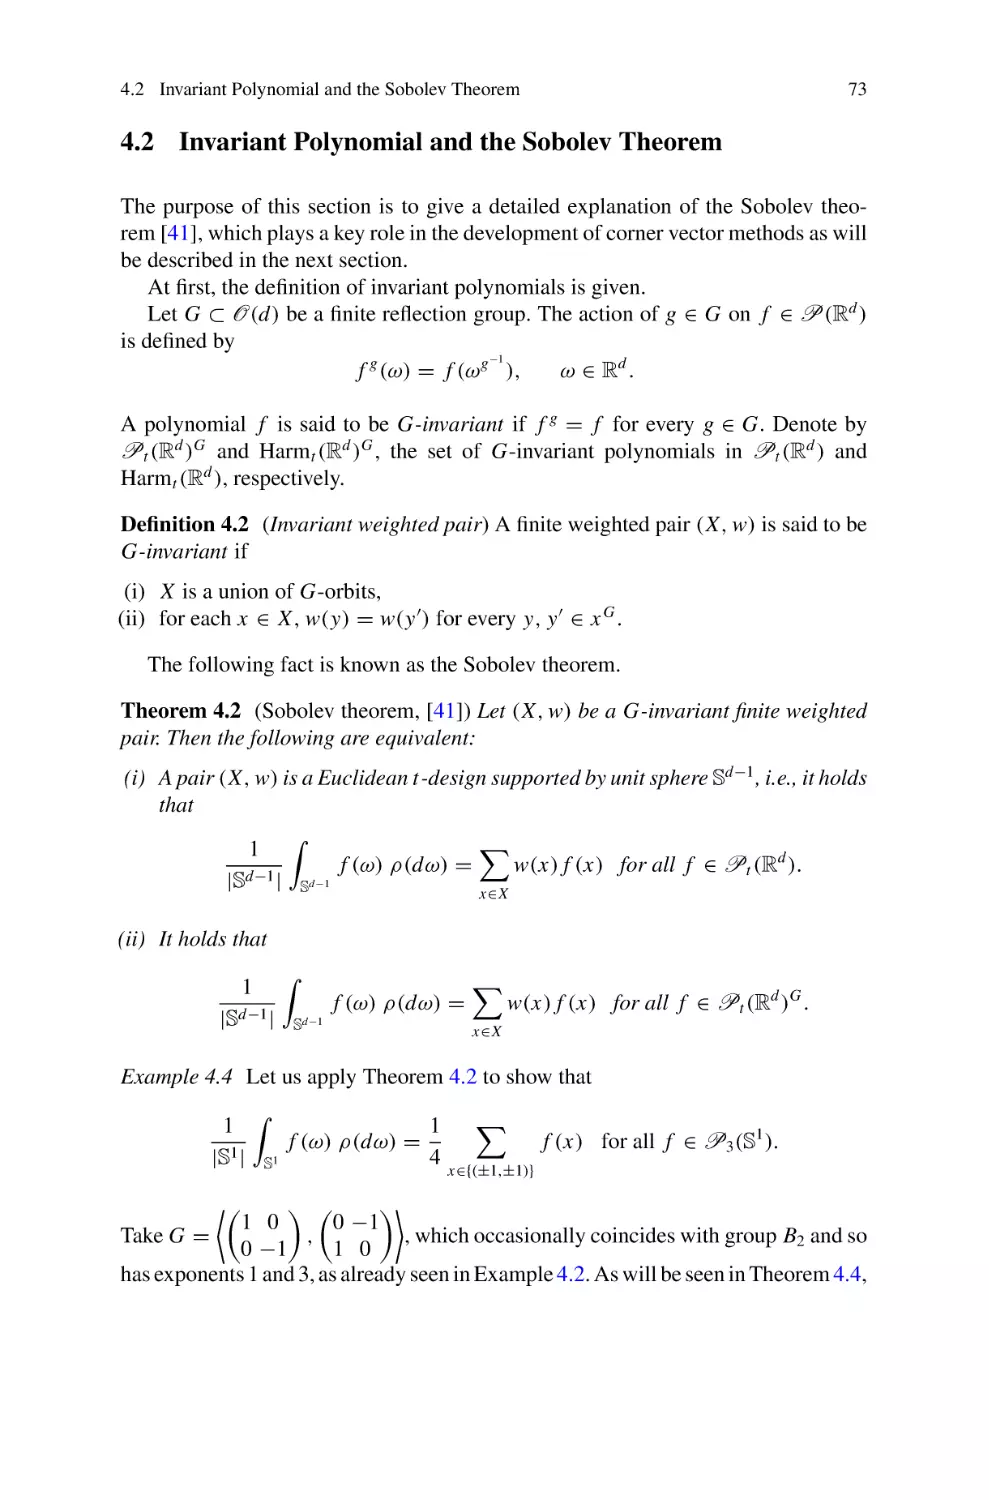 4.2 Invariant Polynomial and the Sobolev Theorem